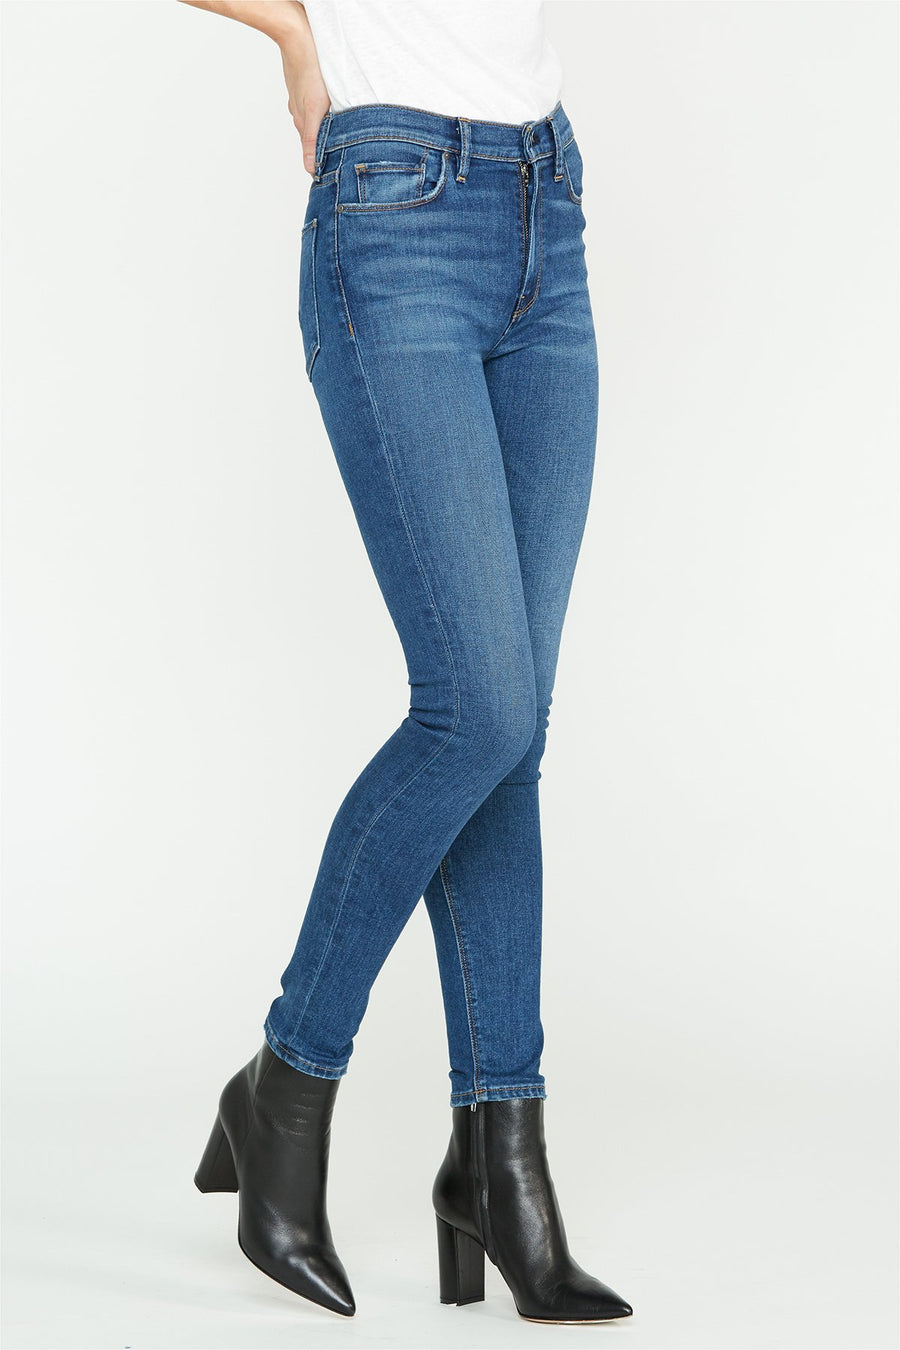 HUDSON JEANS Barbara High Rise in Excursion